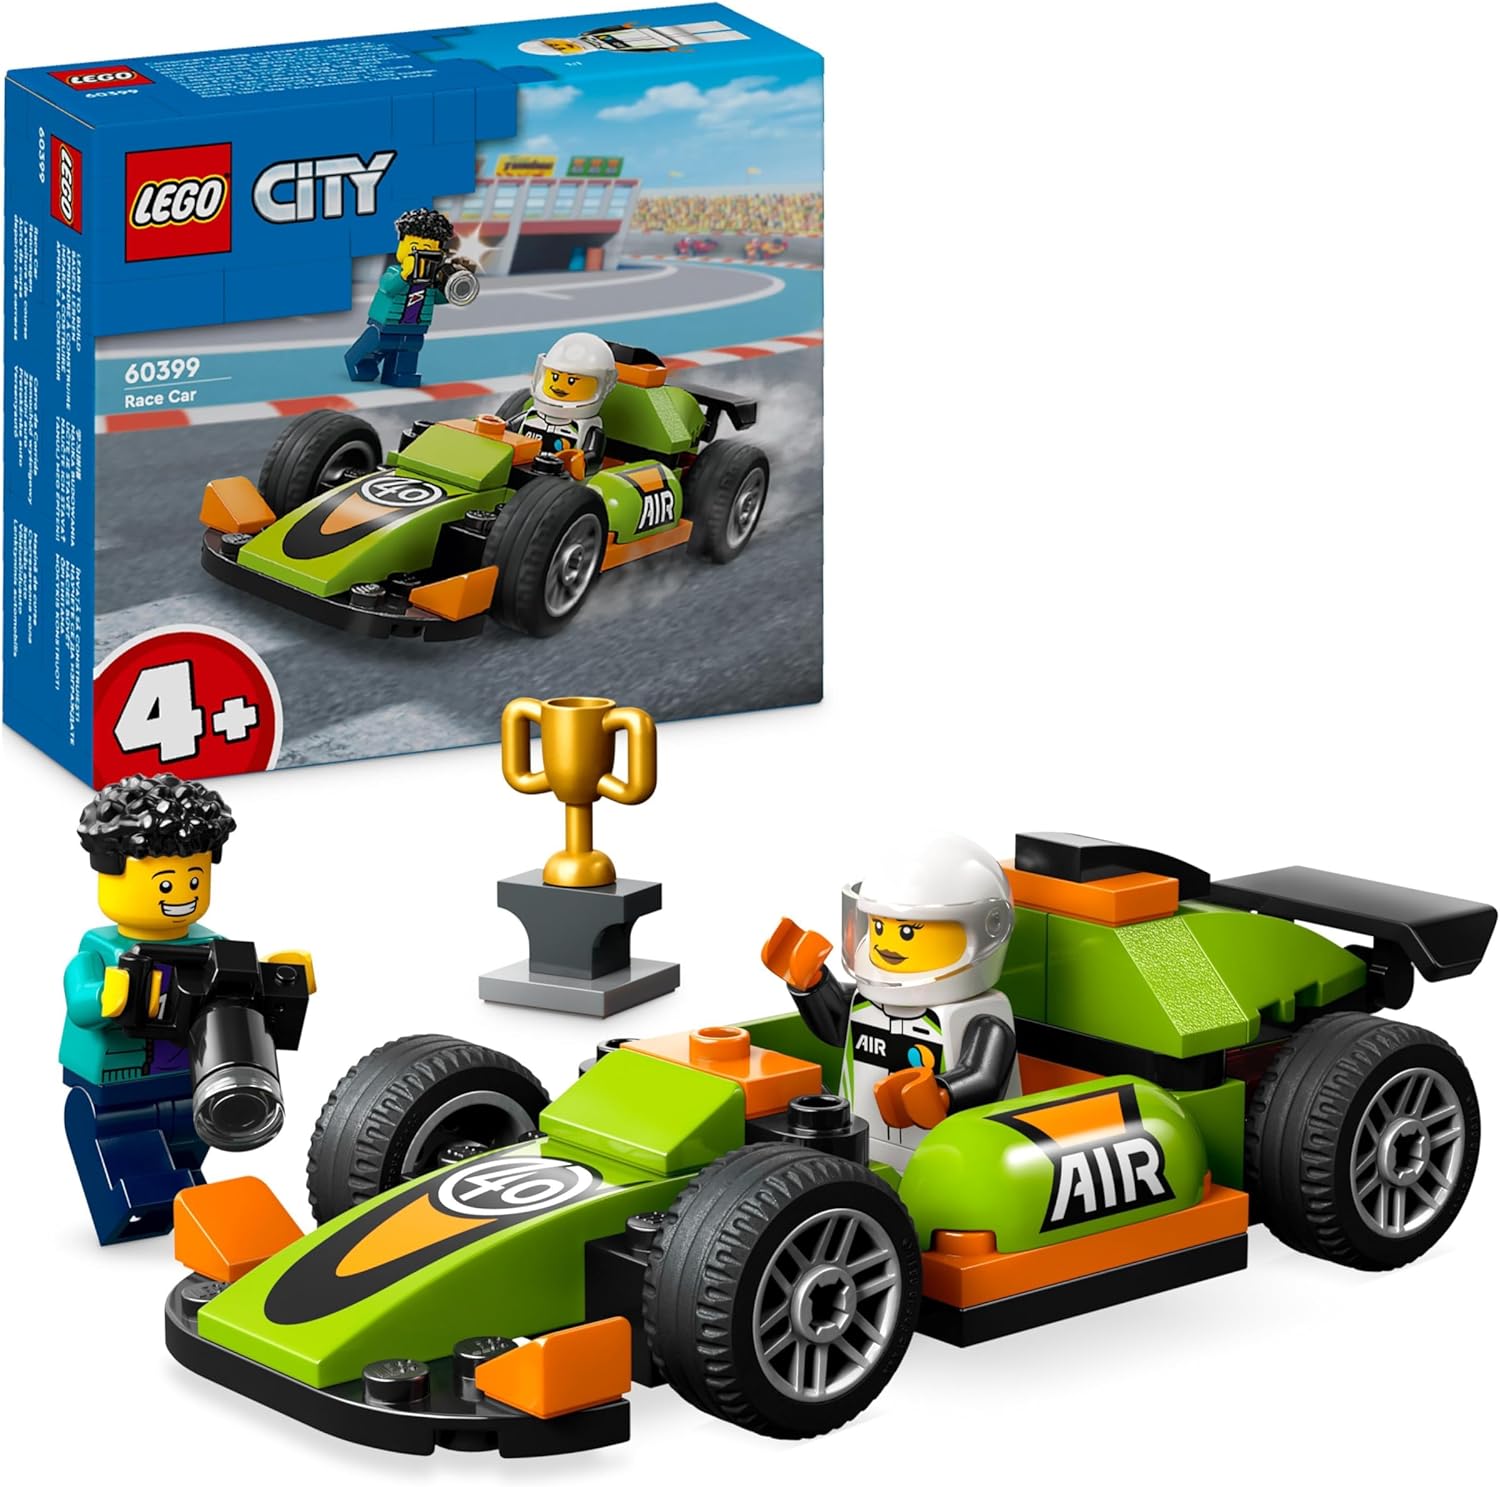 http://honestforwarder.com/uploads/product/gHLMFsT54i-lego-city-racing-car-toy-racing-car-classic-sports-car-gift-for-children-car-construction-set-for-boys-and-girls-from-4-years-with-2-mini-figures-including-a-photographer-and-a-racer-6039953.jpg